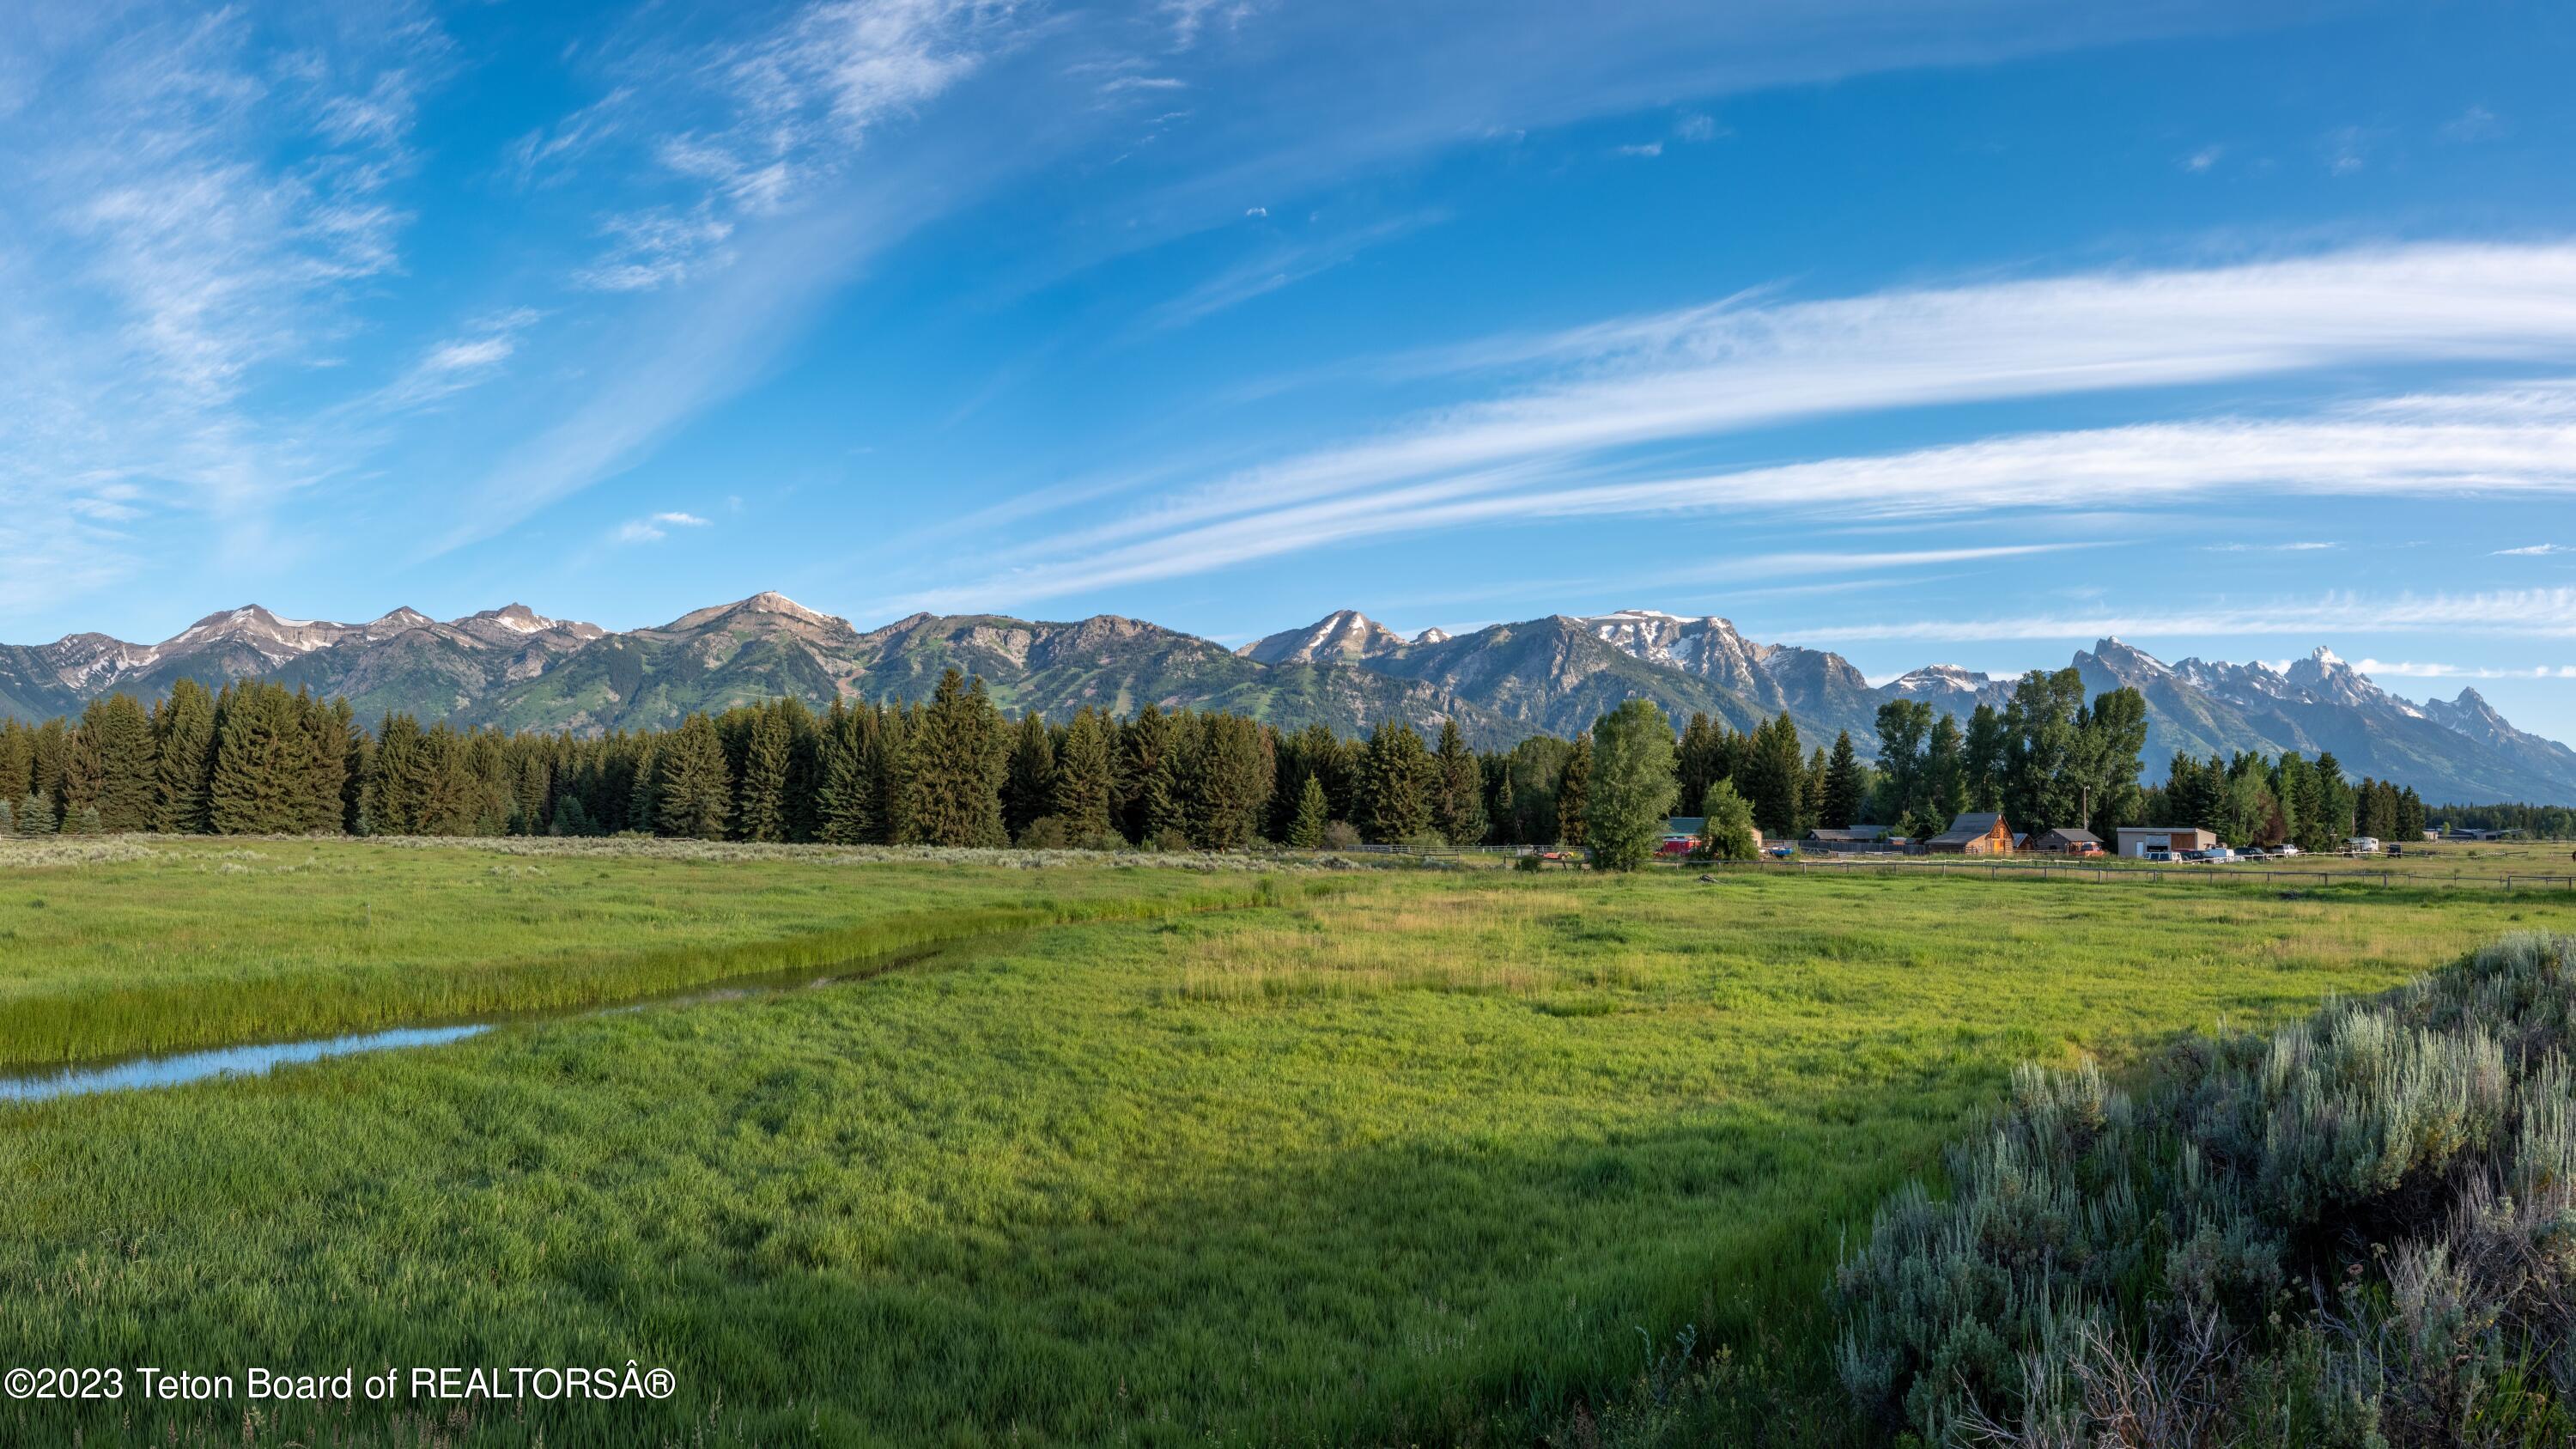 _DSF7751-Pano.low.Res